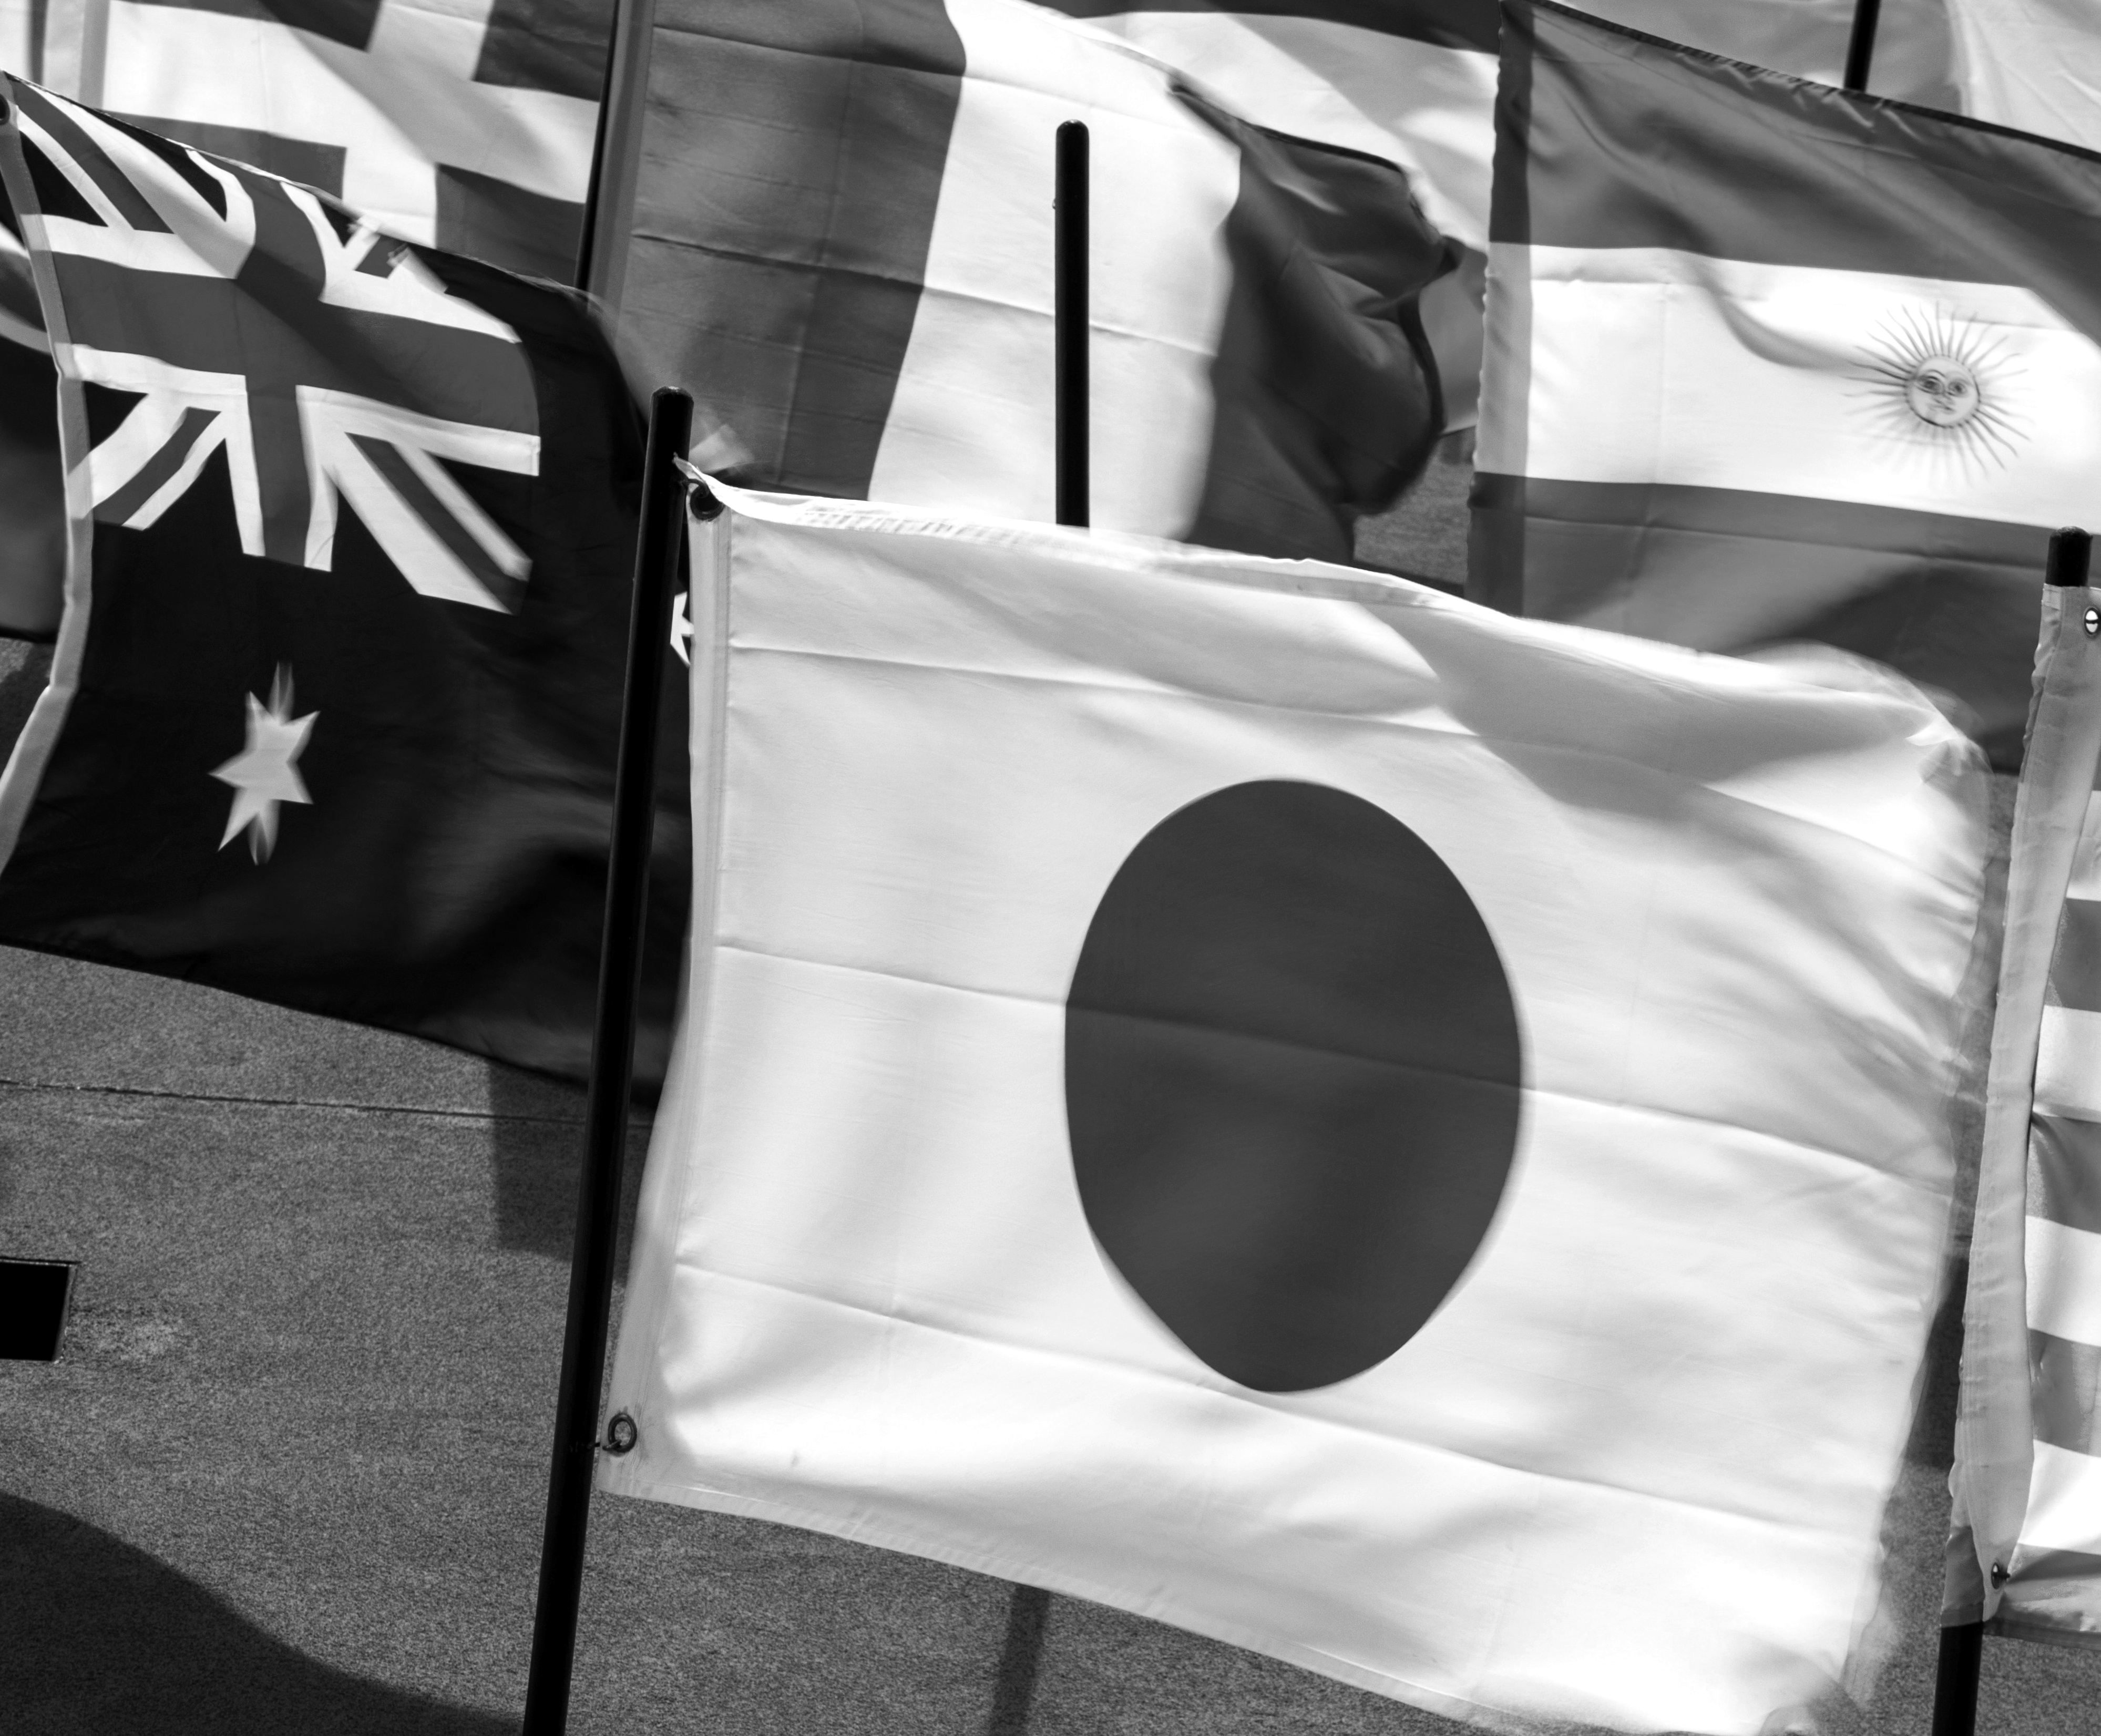 Japan and Korea to usher in an age of consent in trade mark law